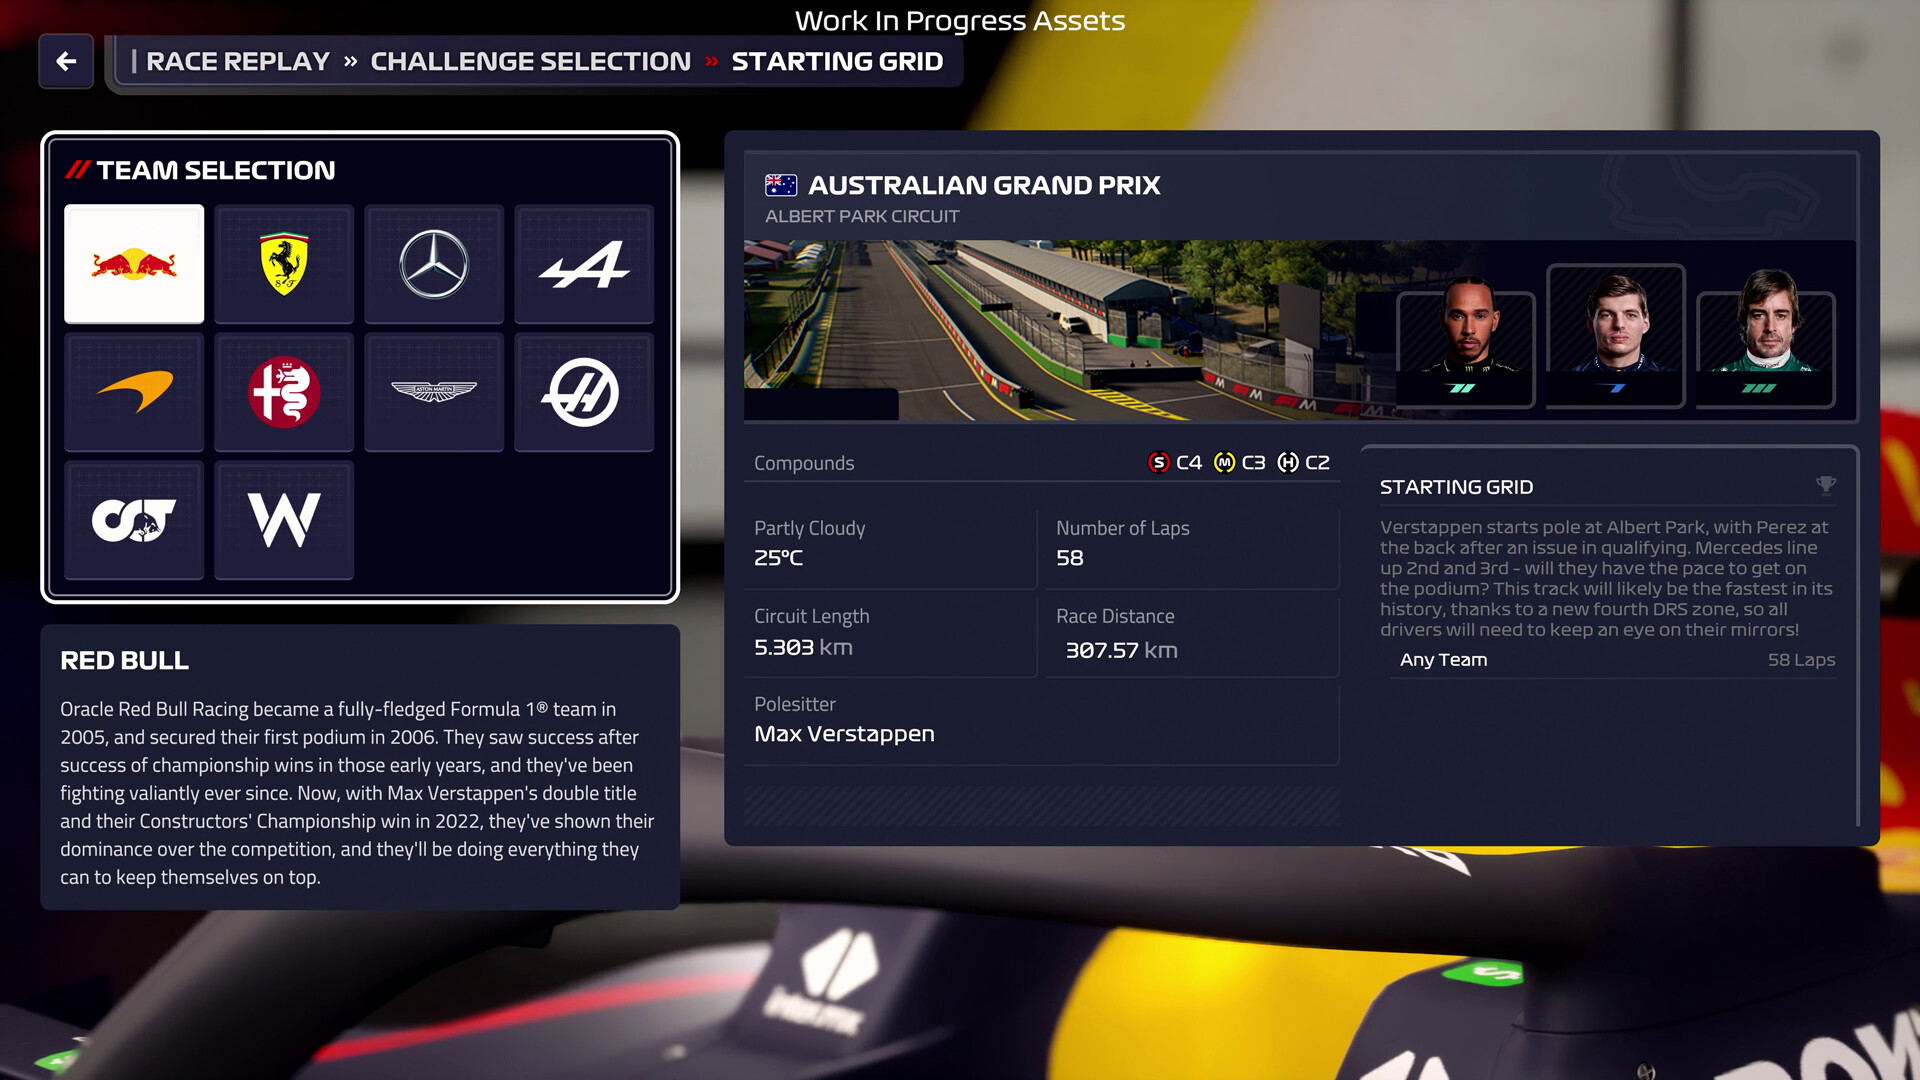 F1 Manager 2023 PlayStation 5 Account Pixelpuffin.net Activation Link